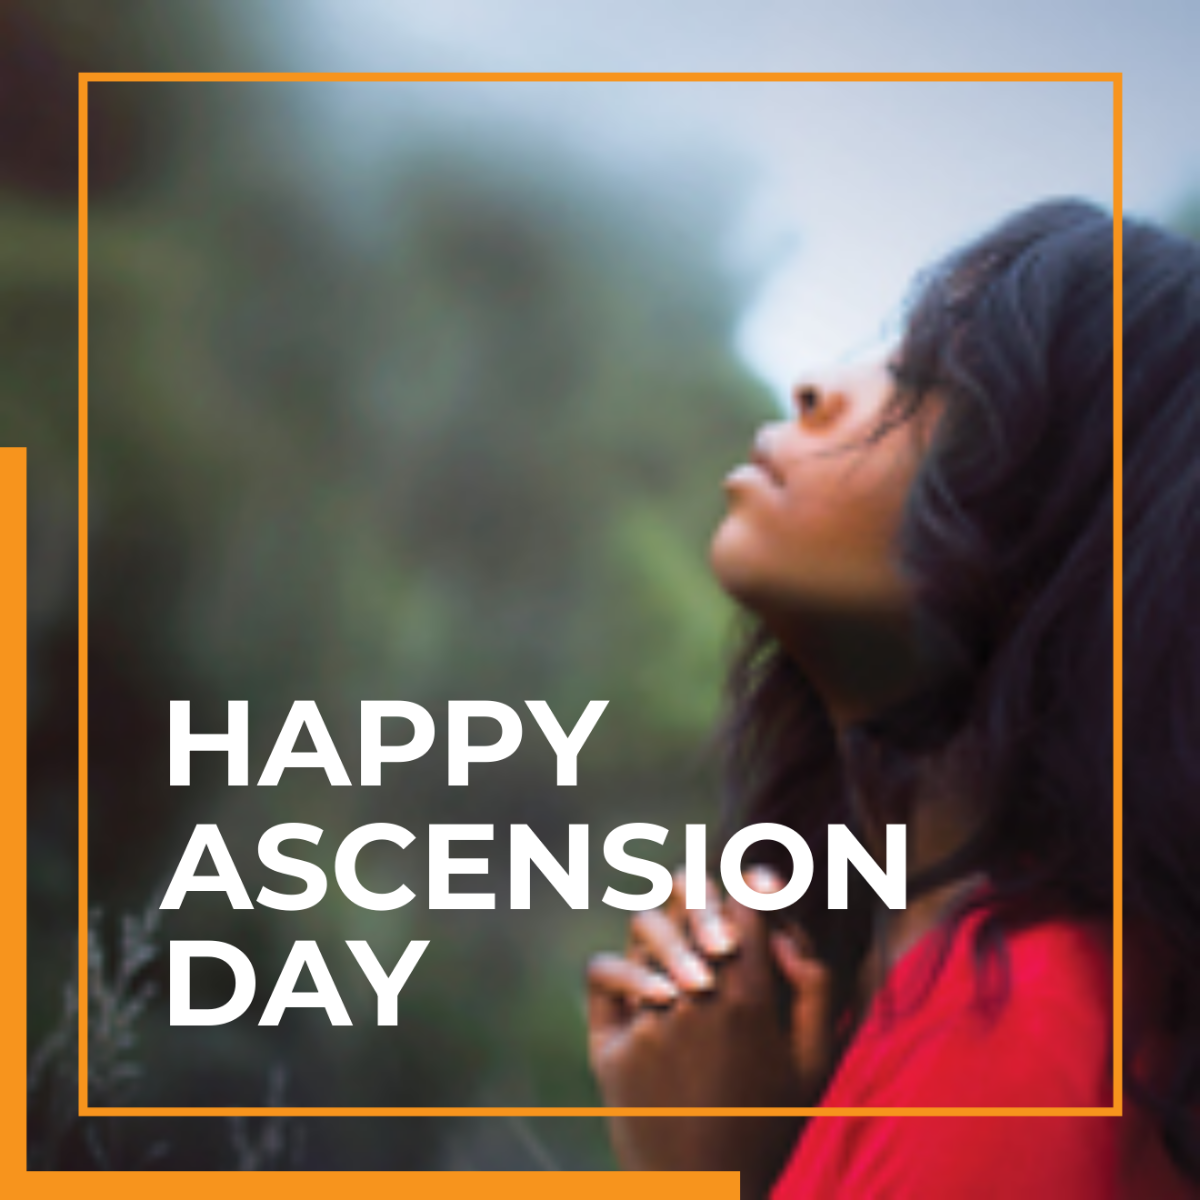 Free Ascension Day Pinterest Profile Photo Template